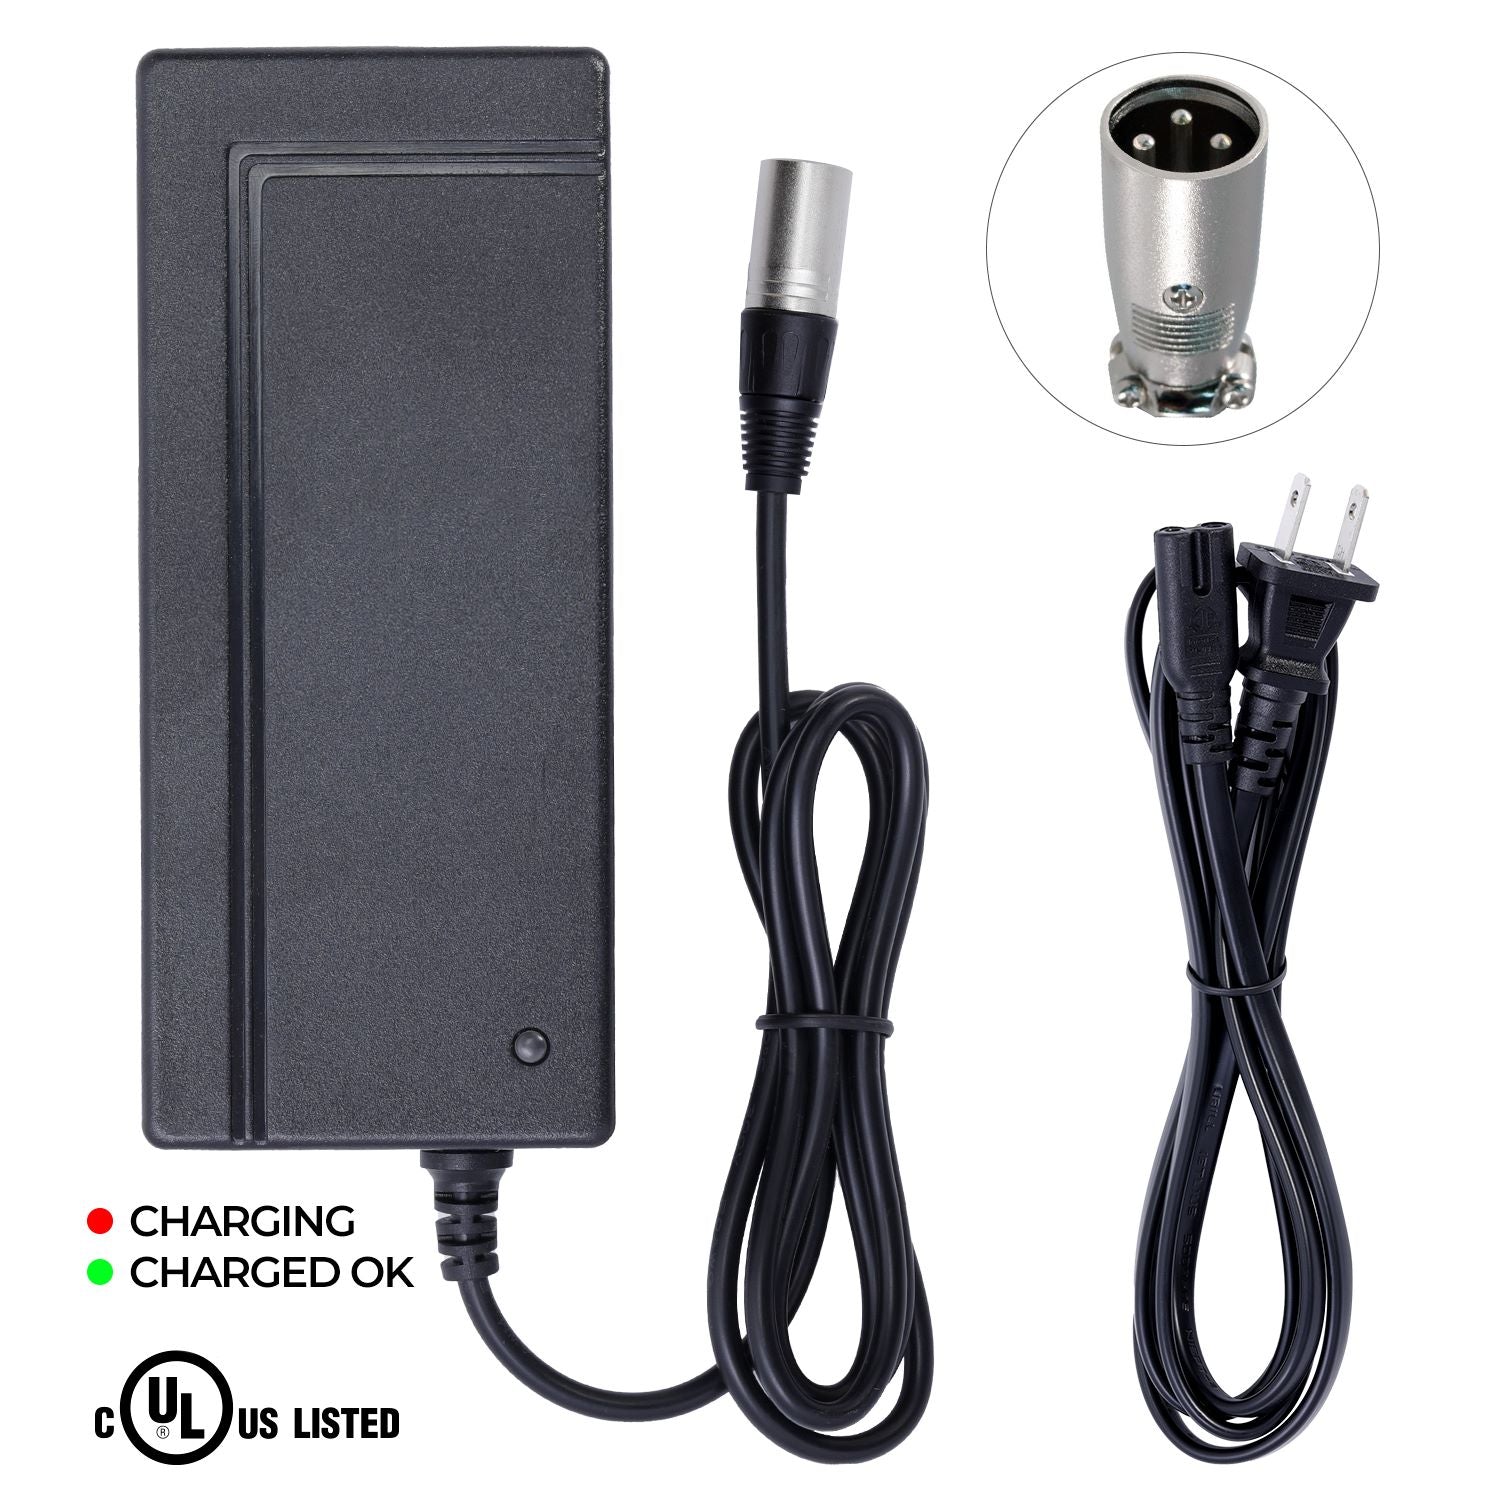 Charger for Pacelite HCF 705 Electric Scooter e-Bike